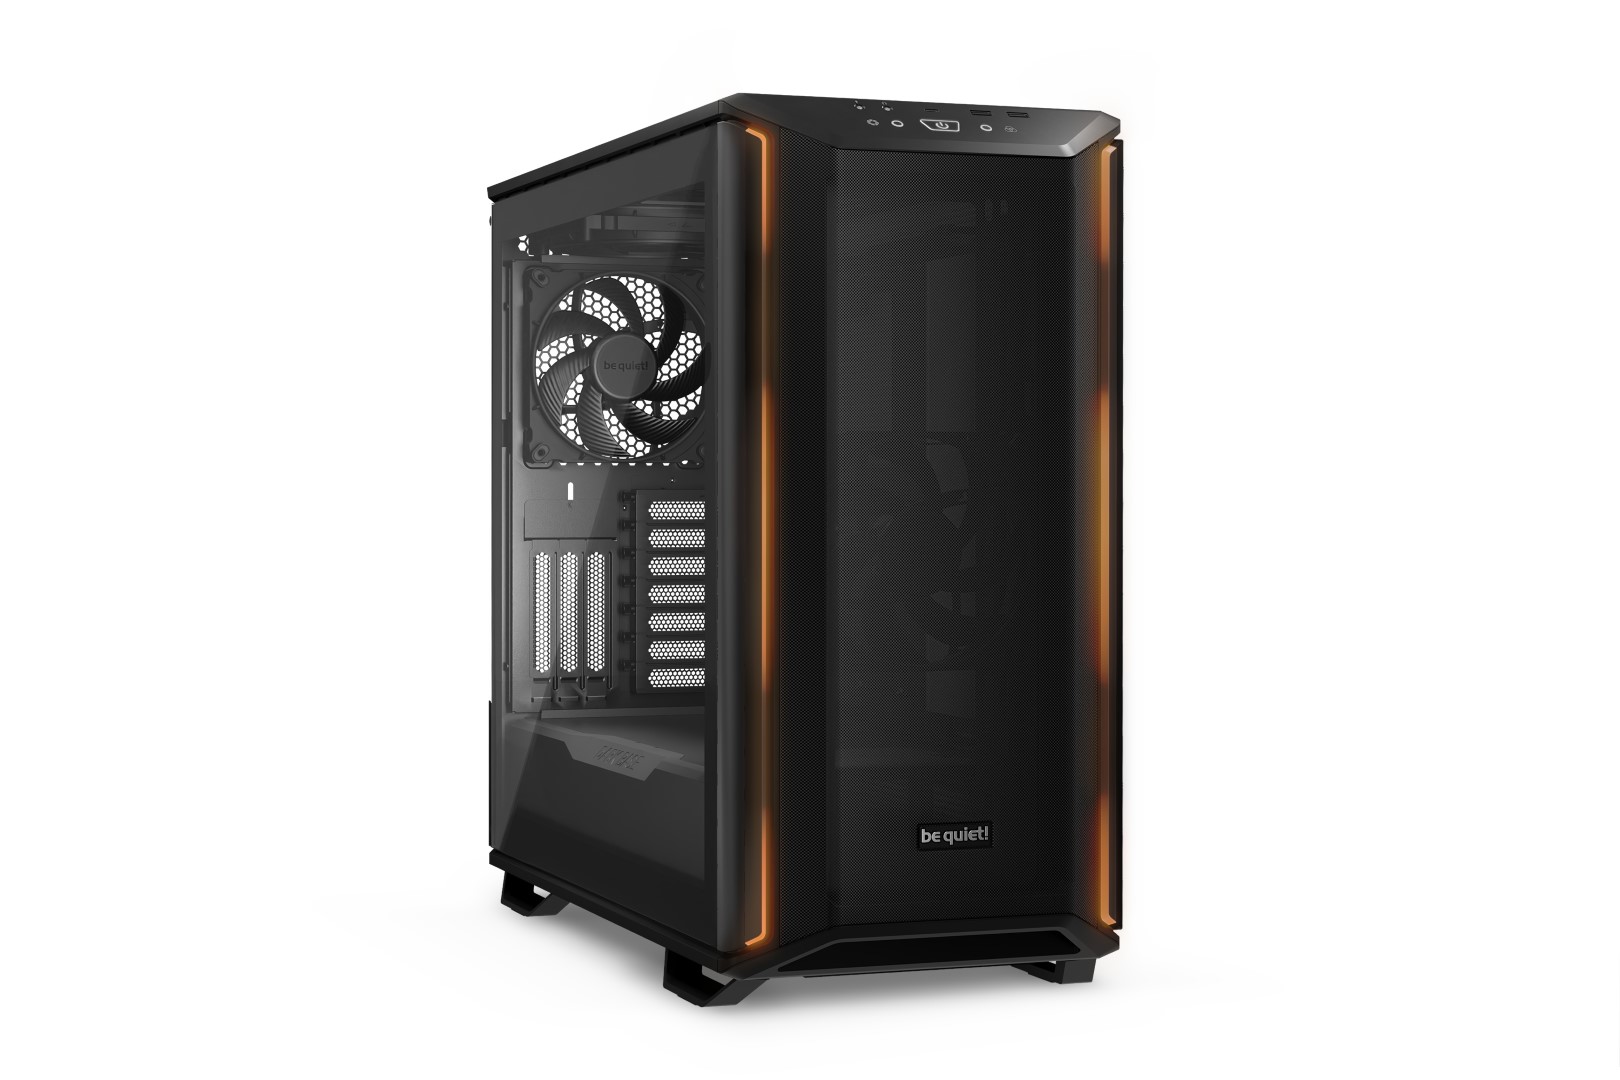 be quiet! revamps its case lineup with their new Dark base 701 chassis